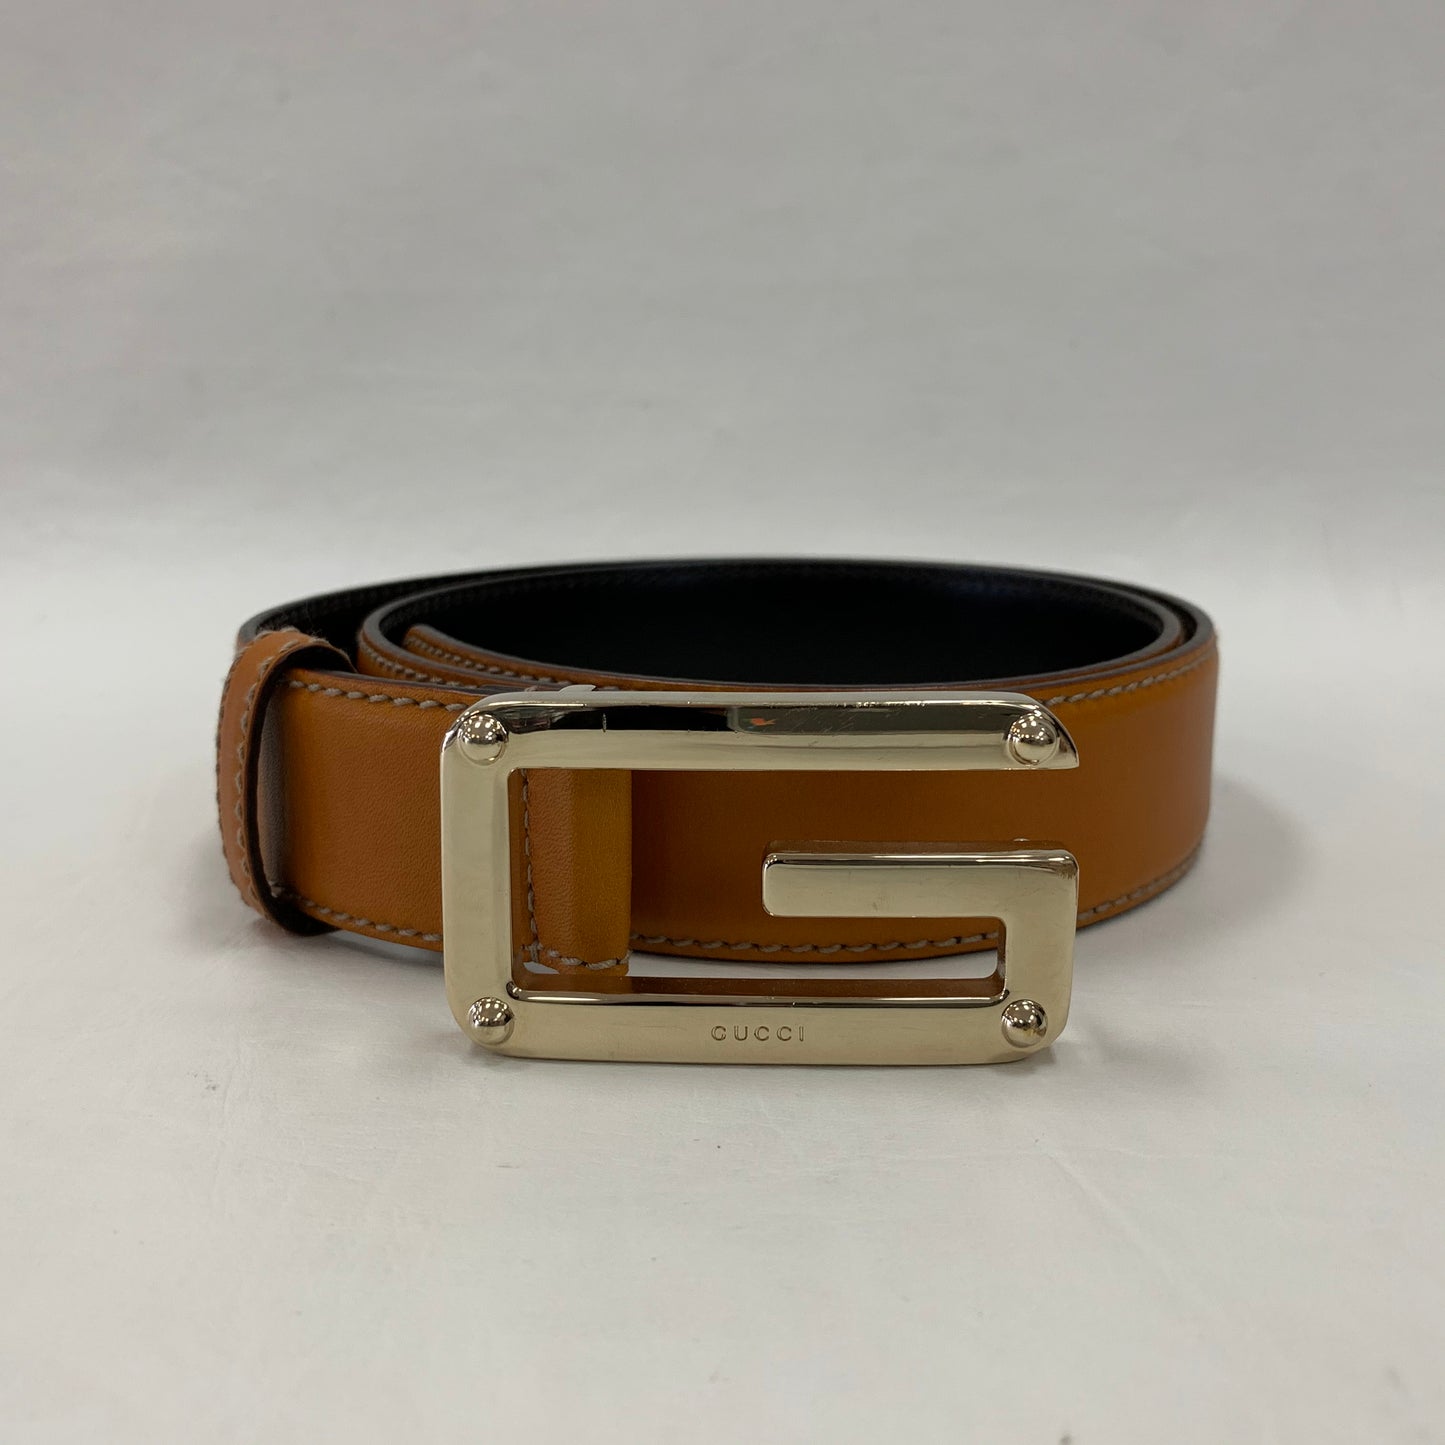 Authentic Gucci Marigold Leather Belt with G Buckle